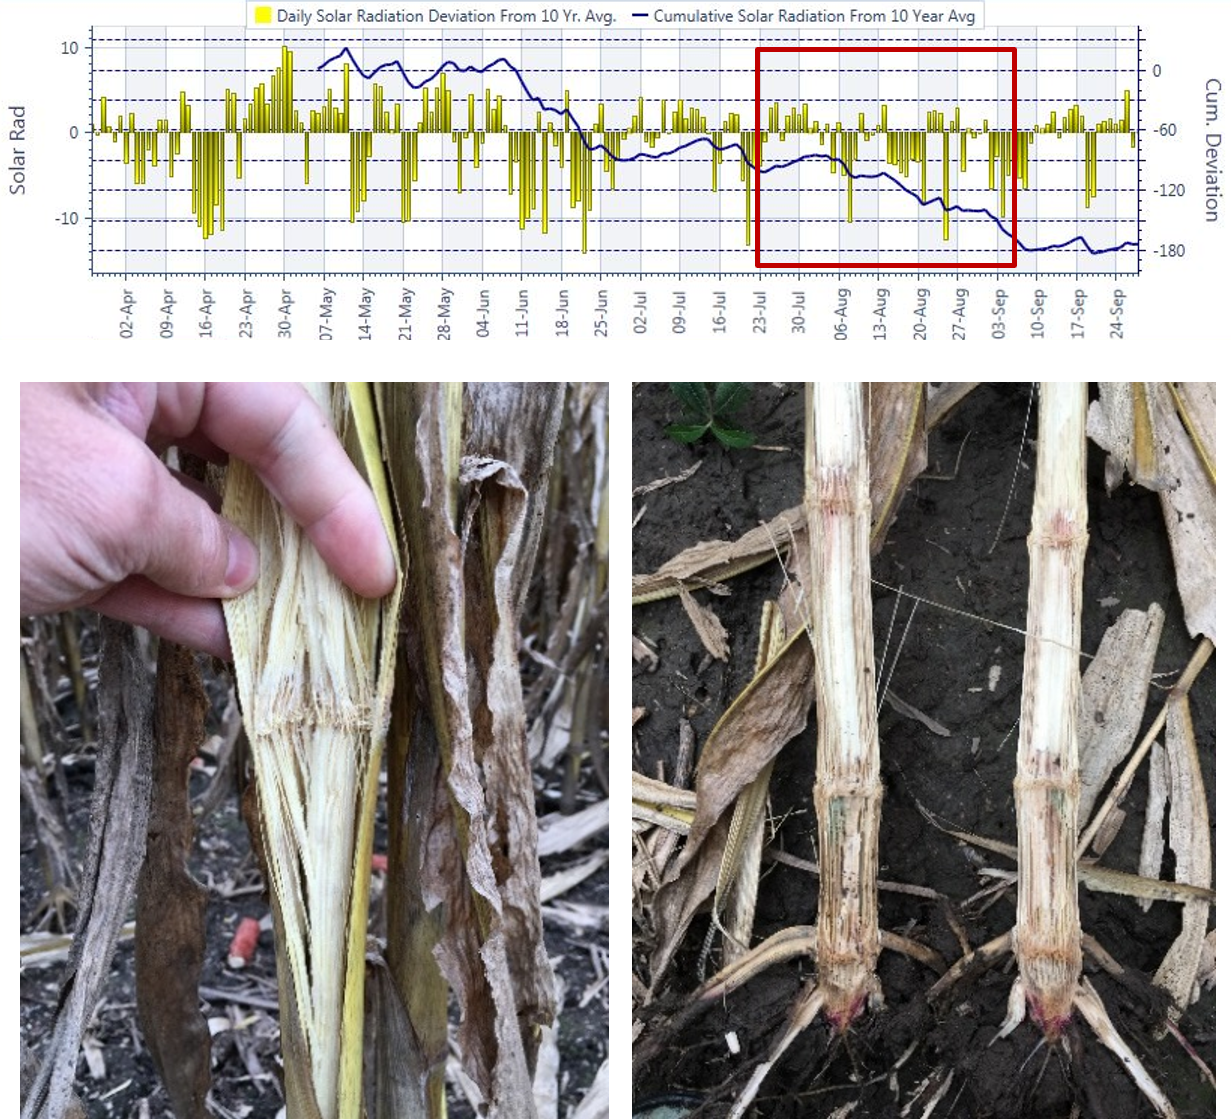 A Pioneer hybrid plot in 2018 in which poor stalk quality was associated with below average solar radiation throughout the grain fill period.